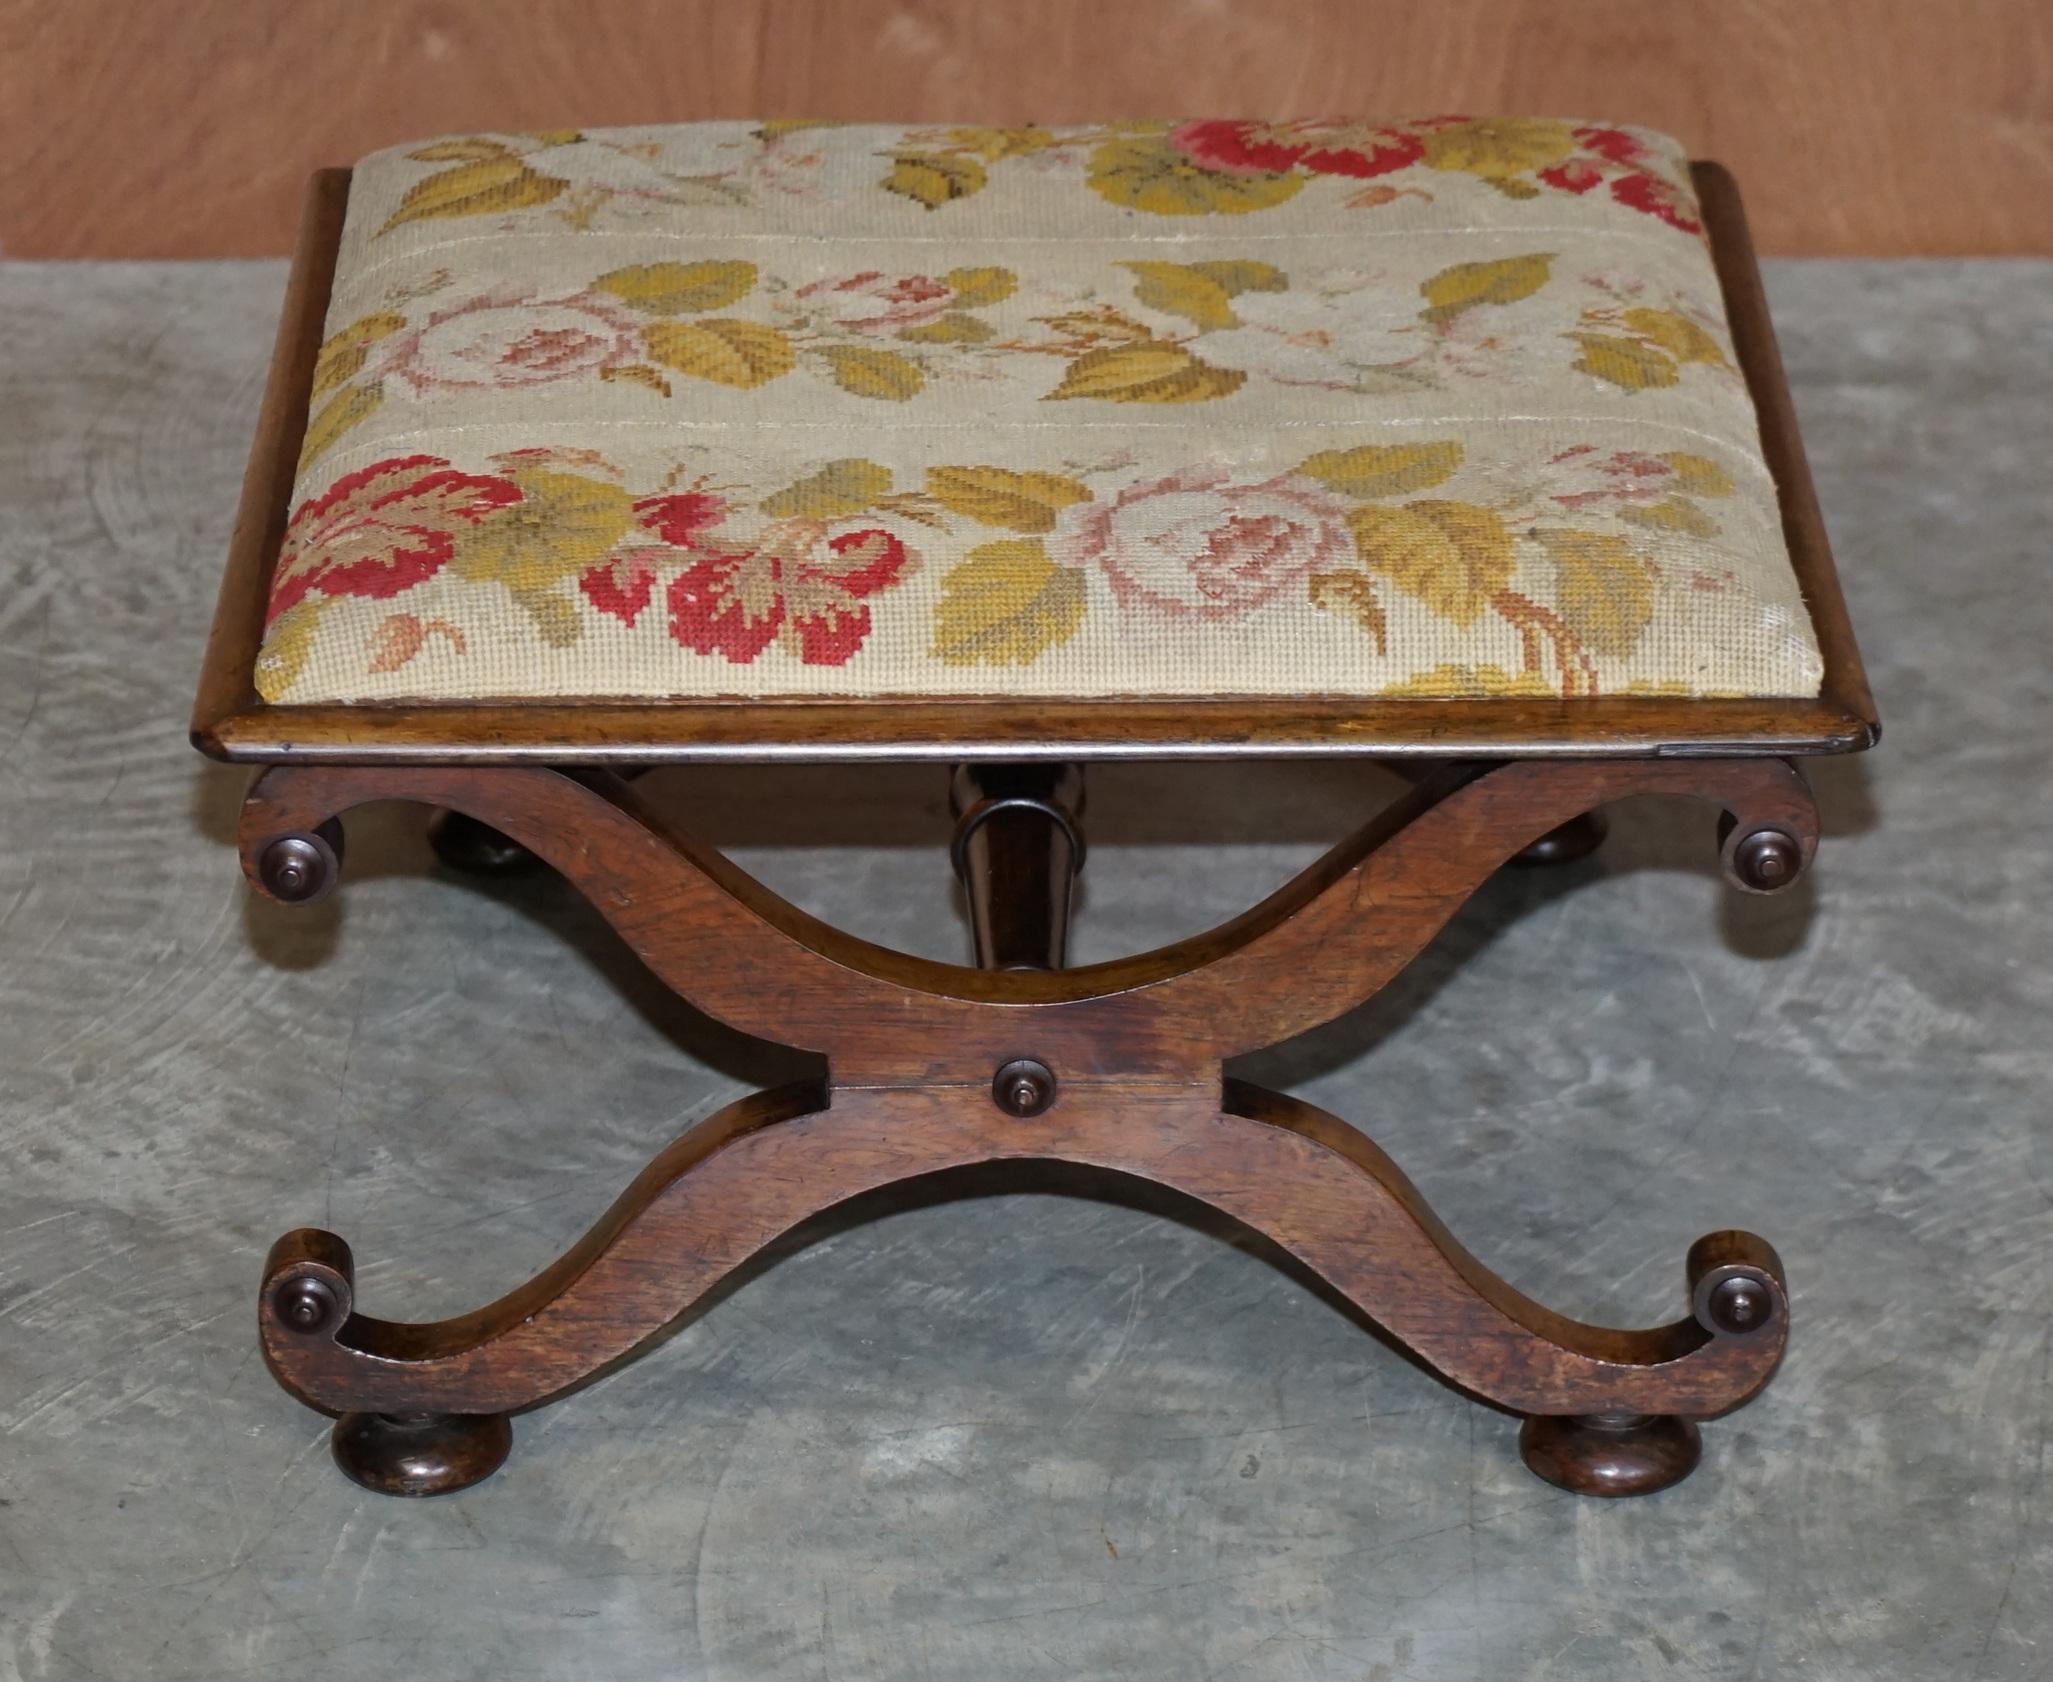 We are delighted to offer this lovely hand embroidered walnut framed William & Mary style Victorian footstool

A very good looking well made and decorative piece. Made in the William & Mary style with wonderful embroidery, the frame is beautifully